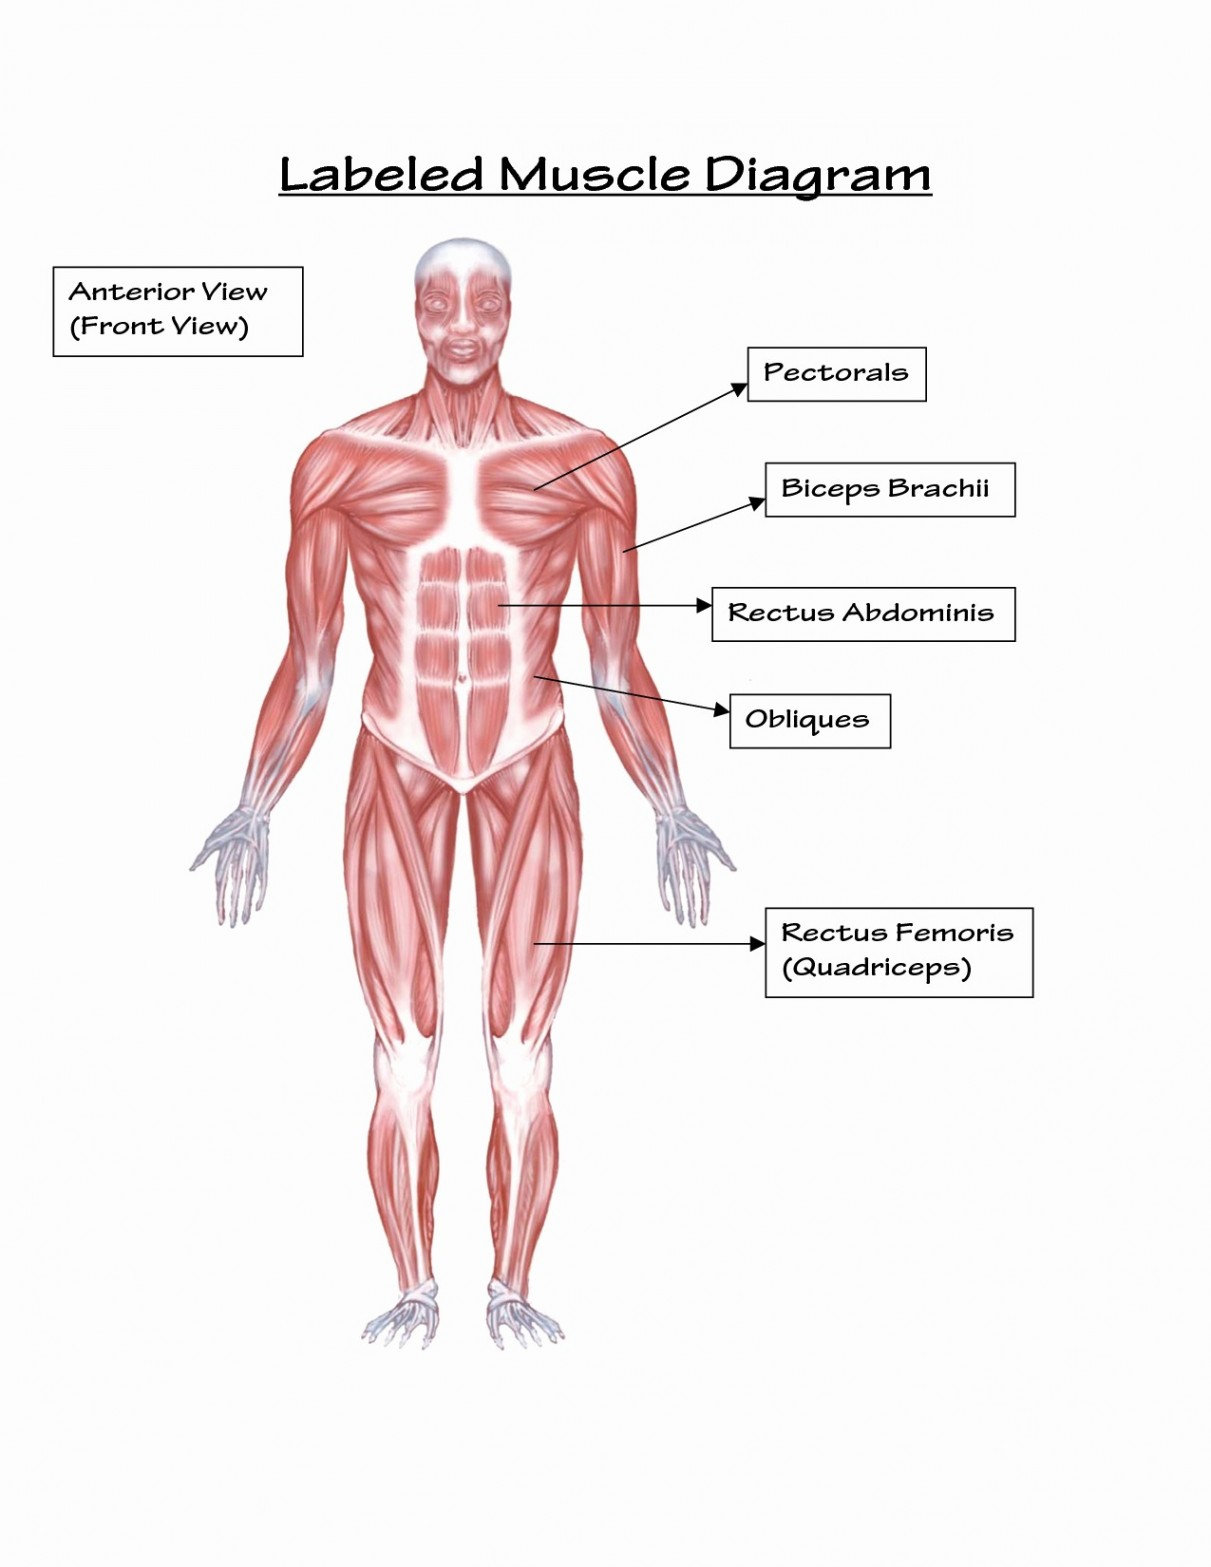 Back Muscle Diagram Labeled Muscle Diagram New 50 Unique Diagram Back Muscles Learn